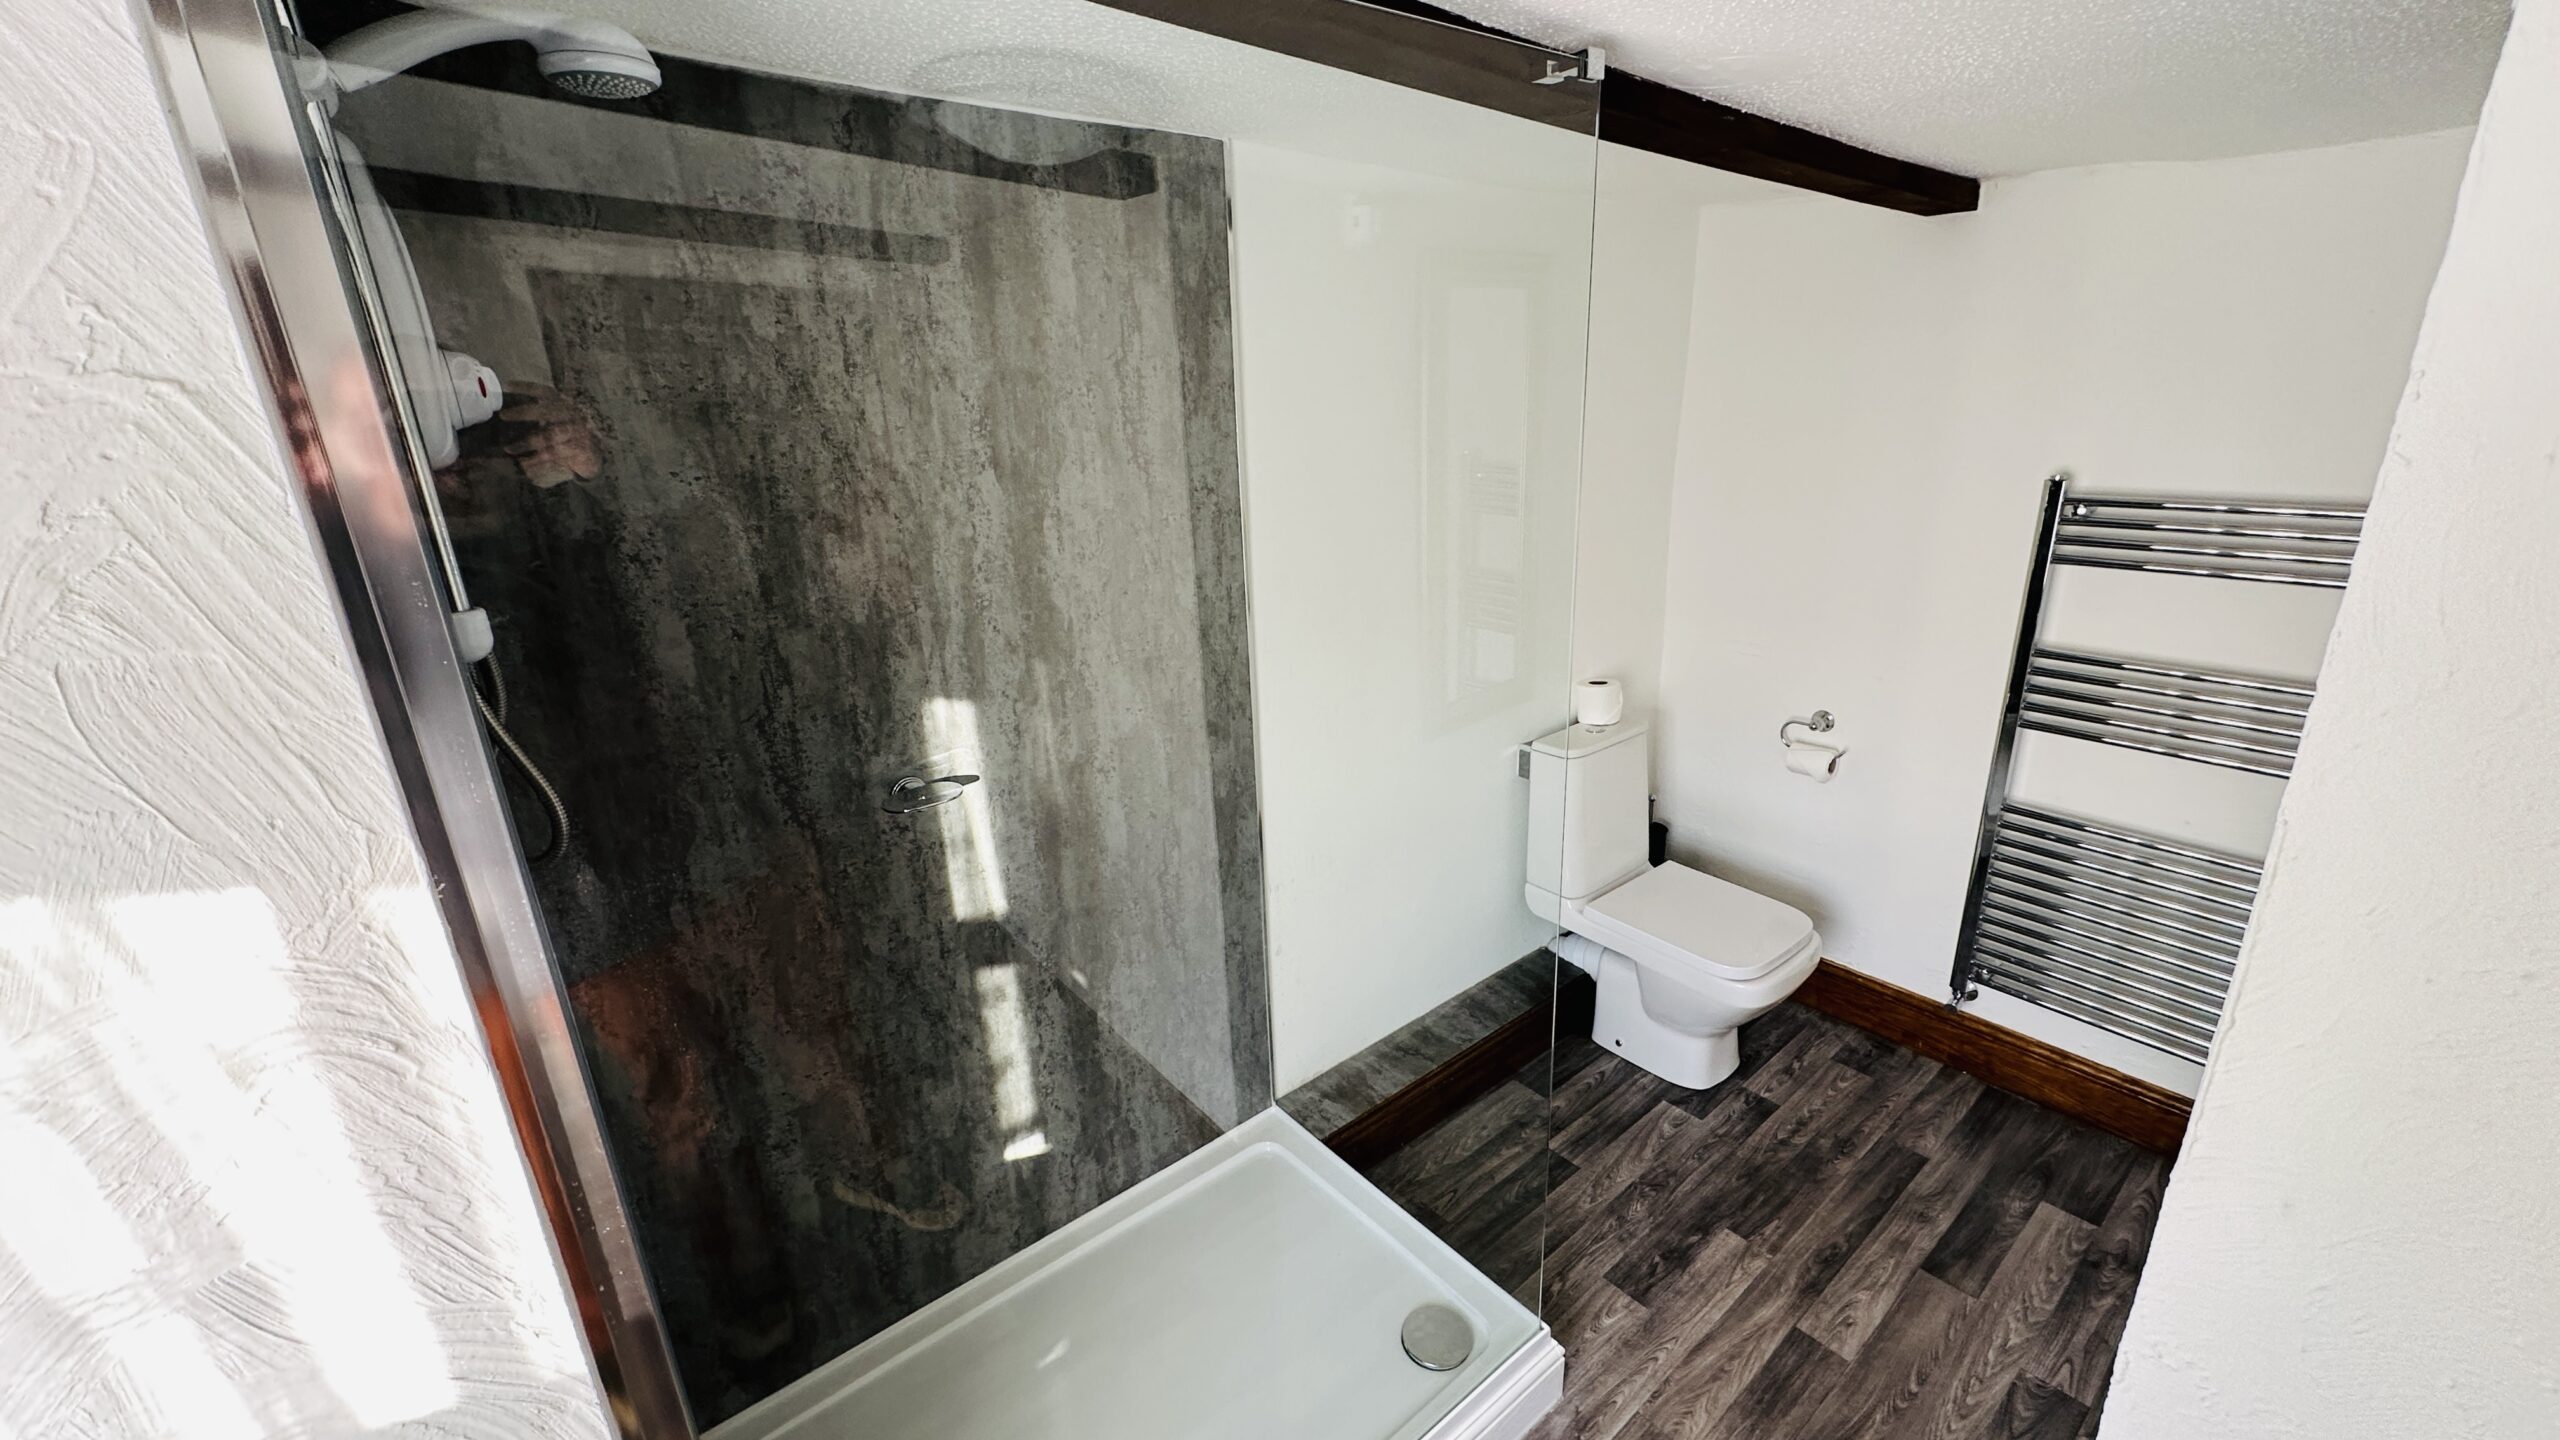 Image of bathroom with toilet and shower.